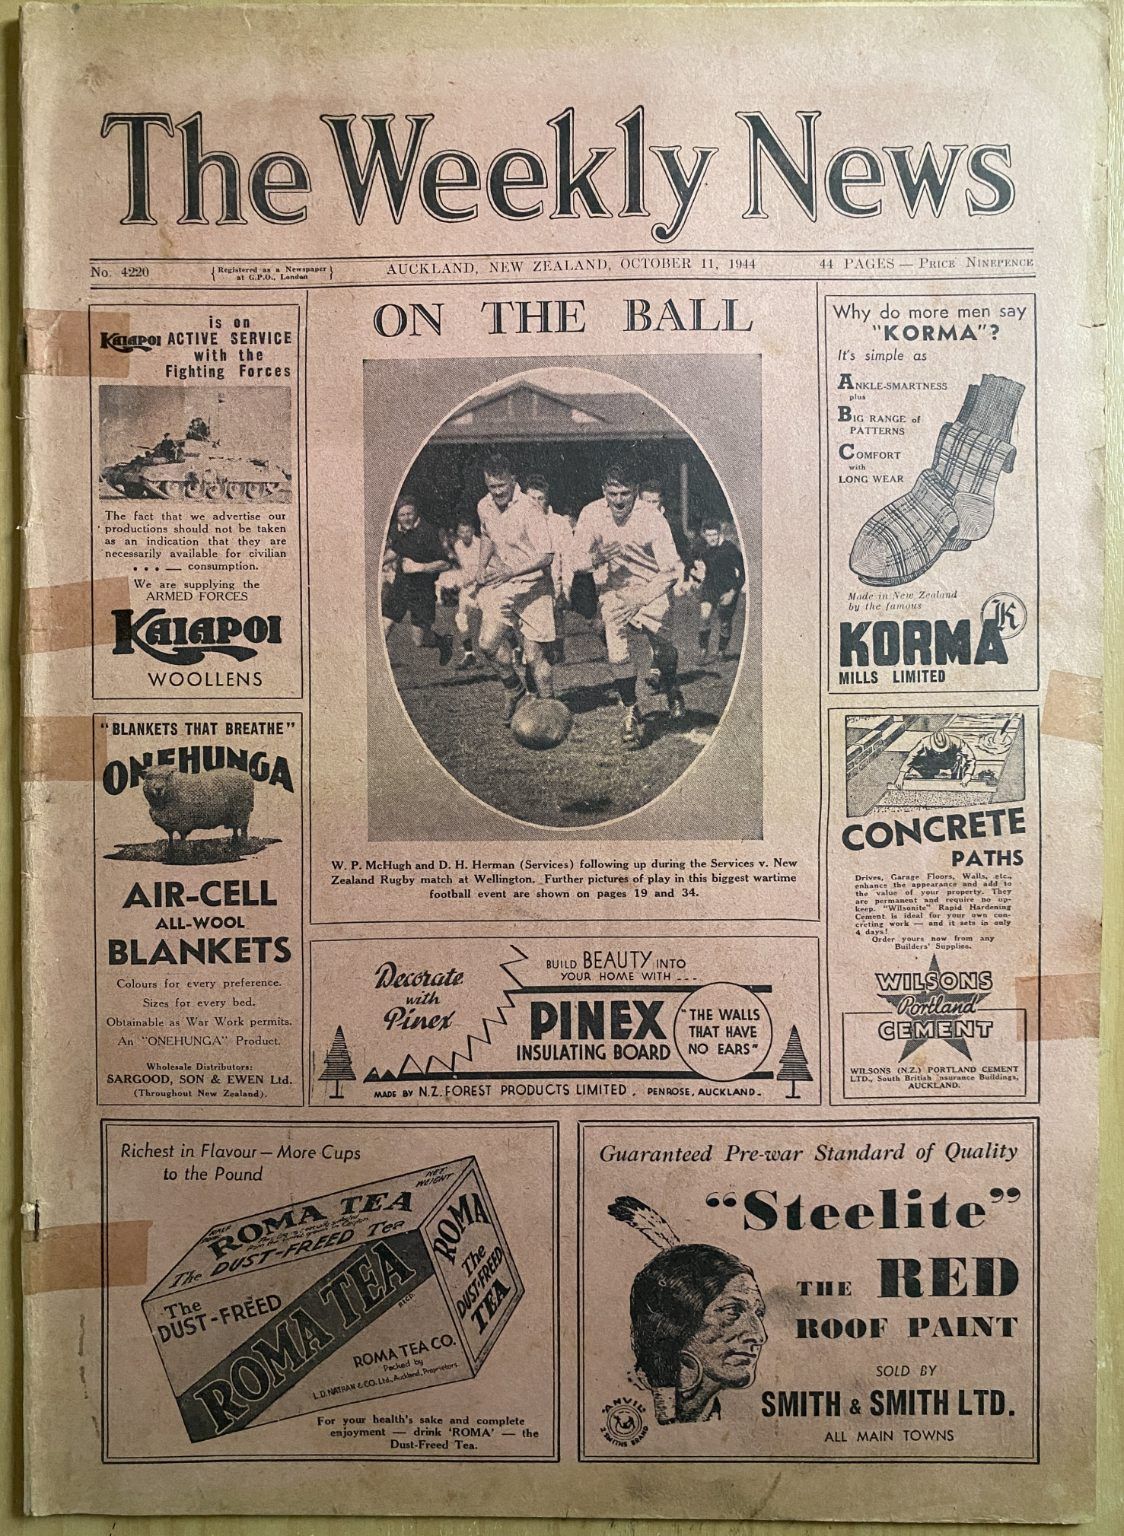 OLD NEWSPAPER: The Weekly News - No. 4220, 11 October 1944